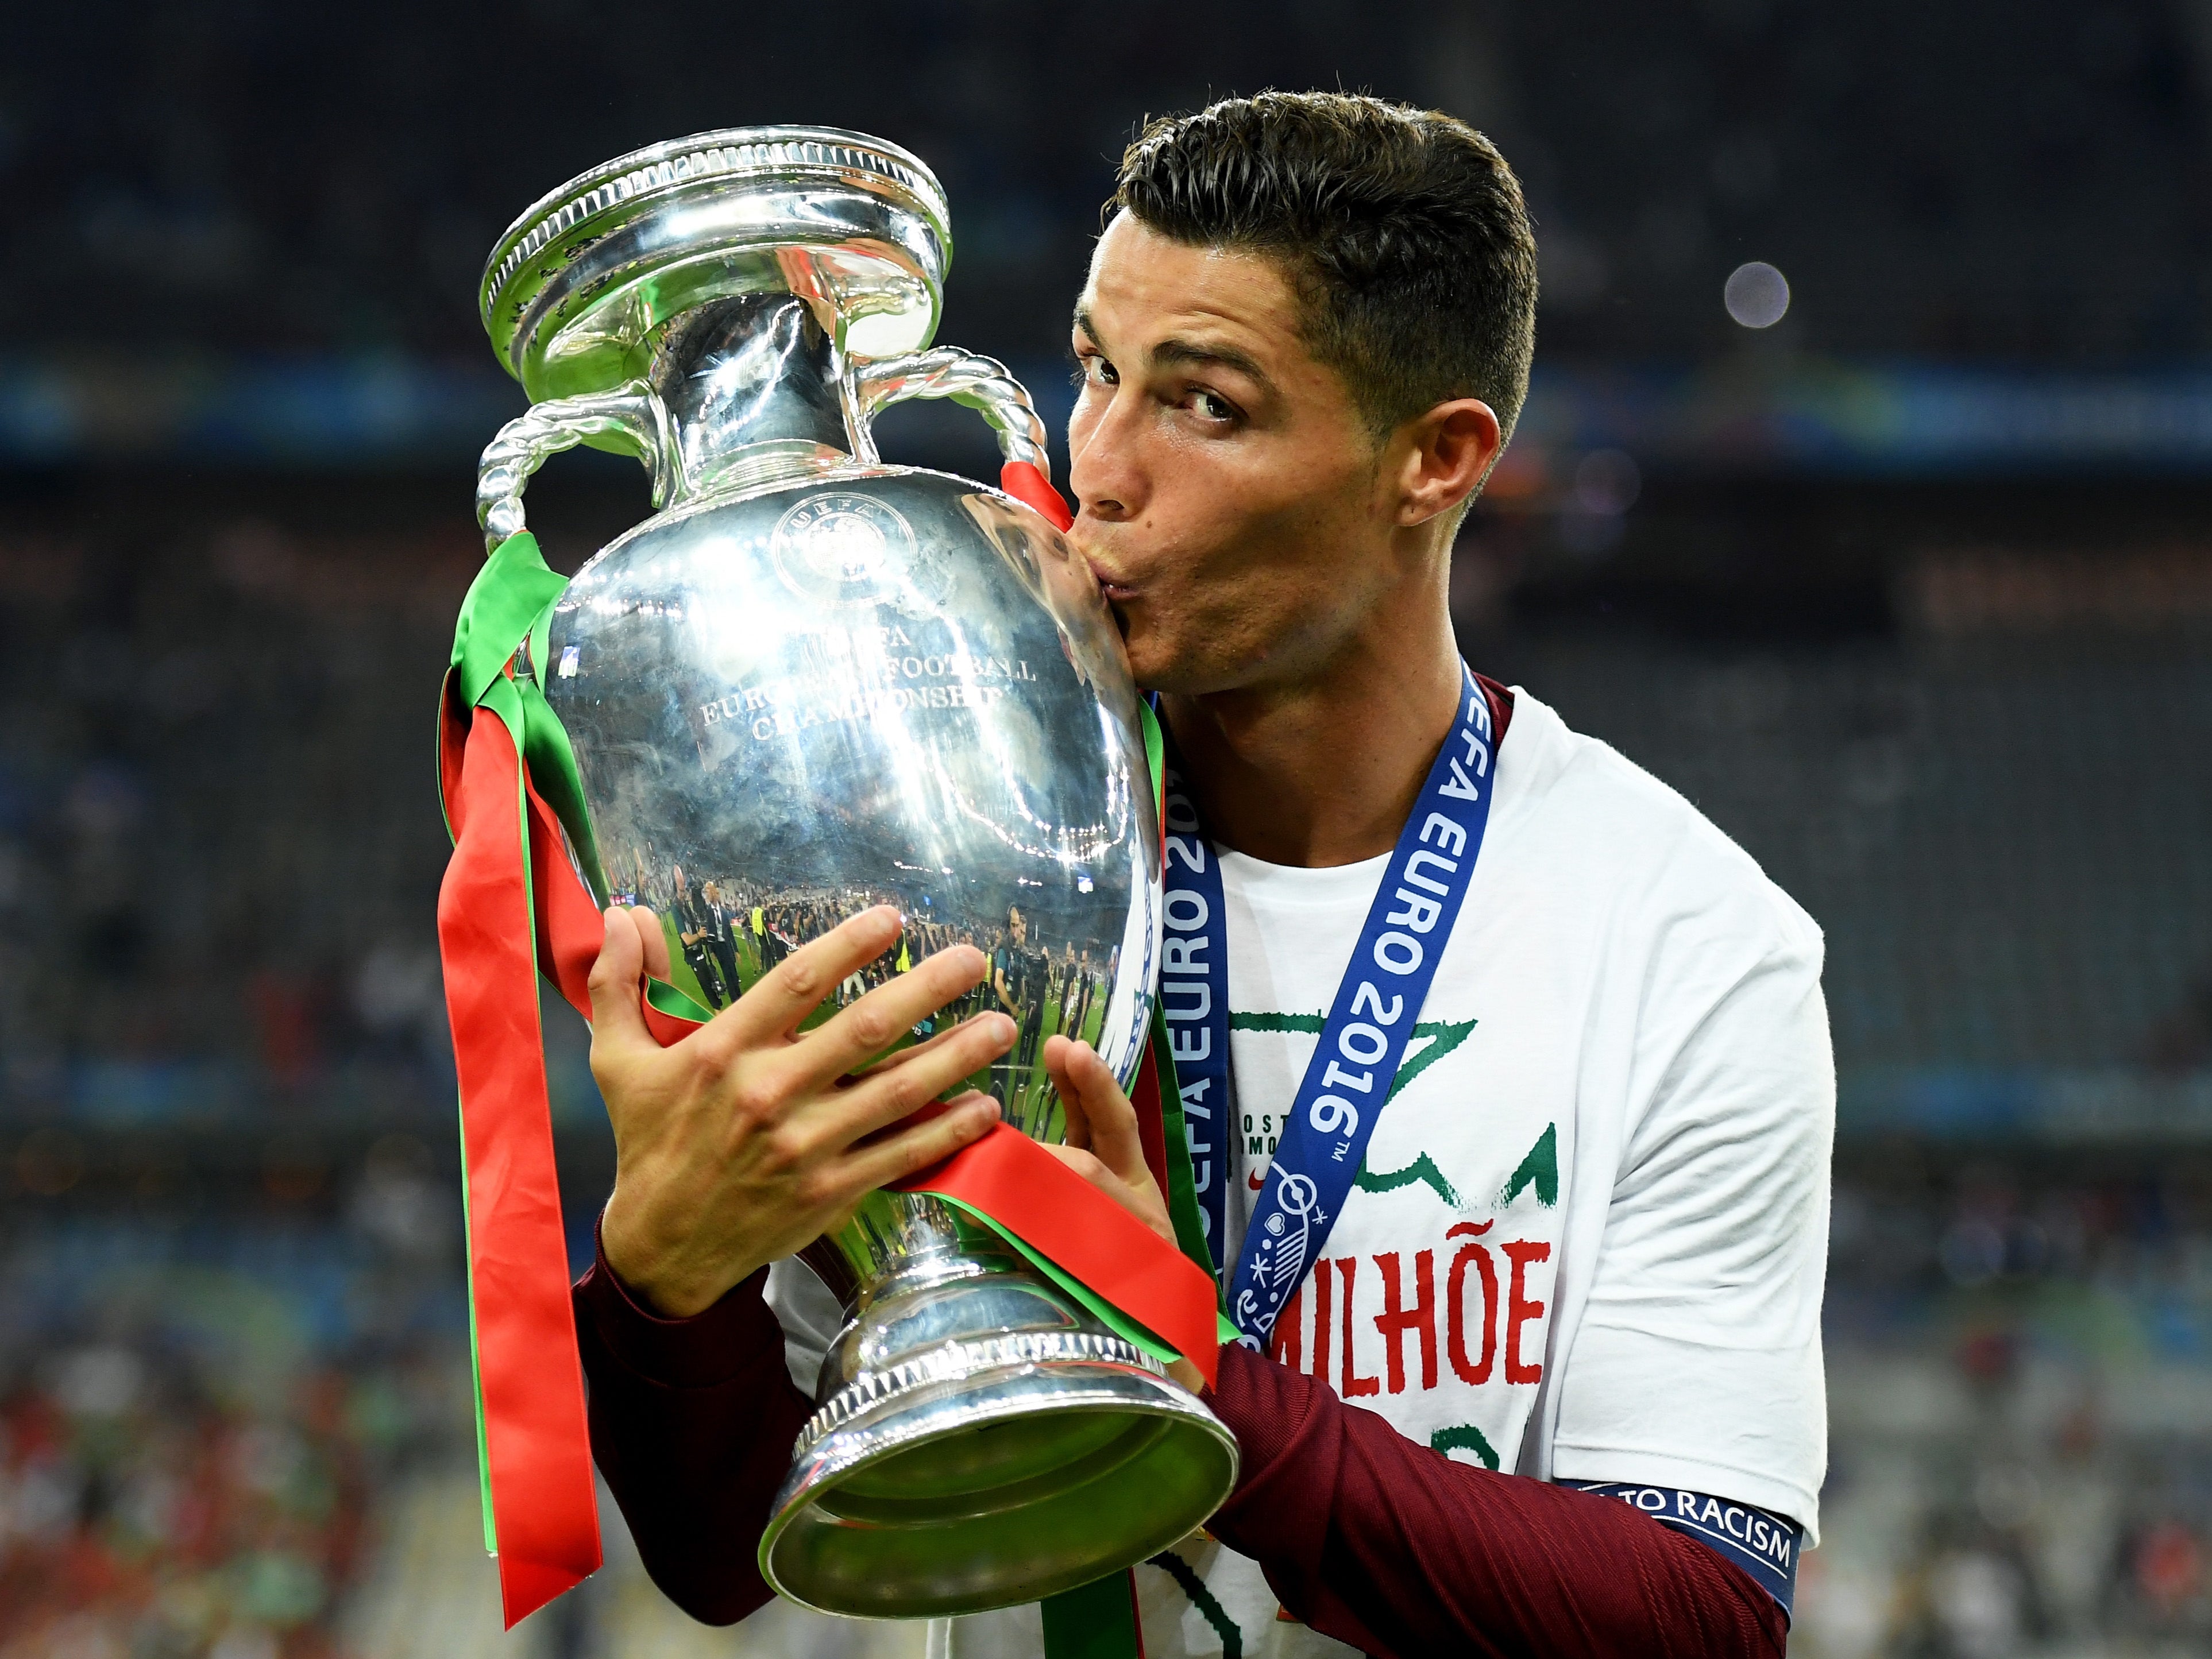 Ronaldo’s grip on the trophy may be loosened by Portugal’s daunting group schedule